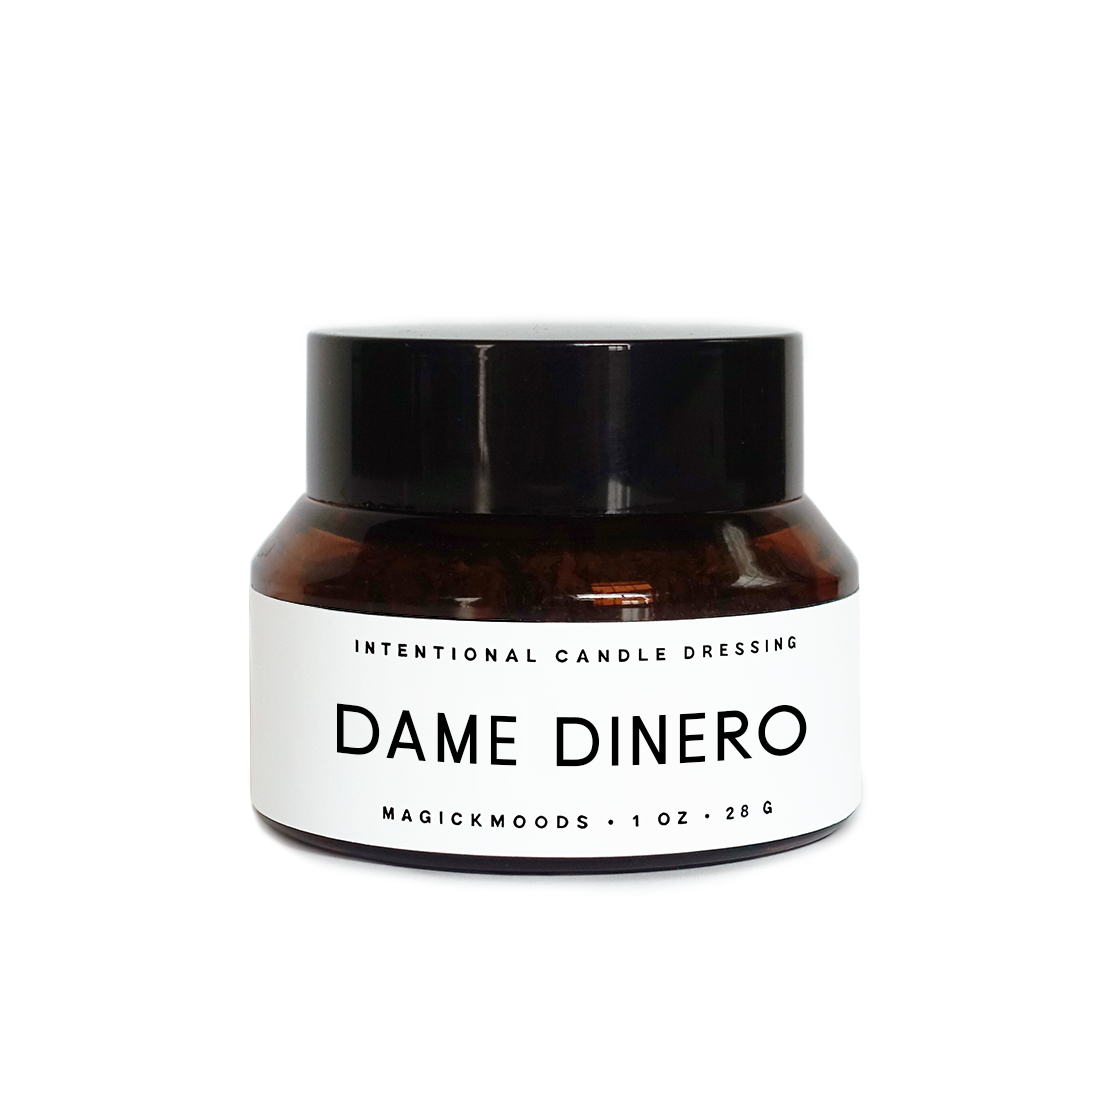 Dame Dinero Candle Dressing